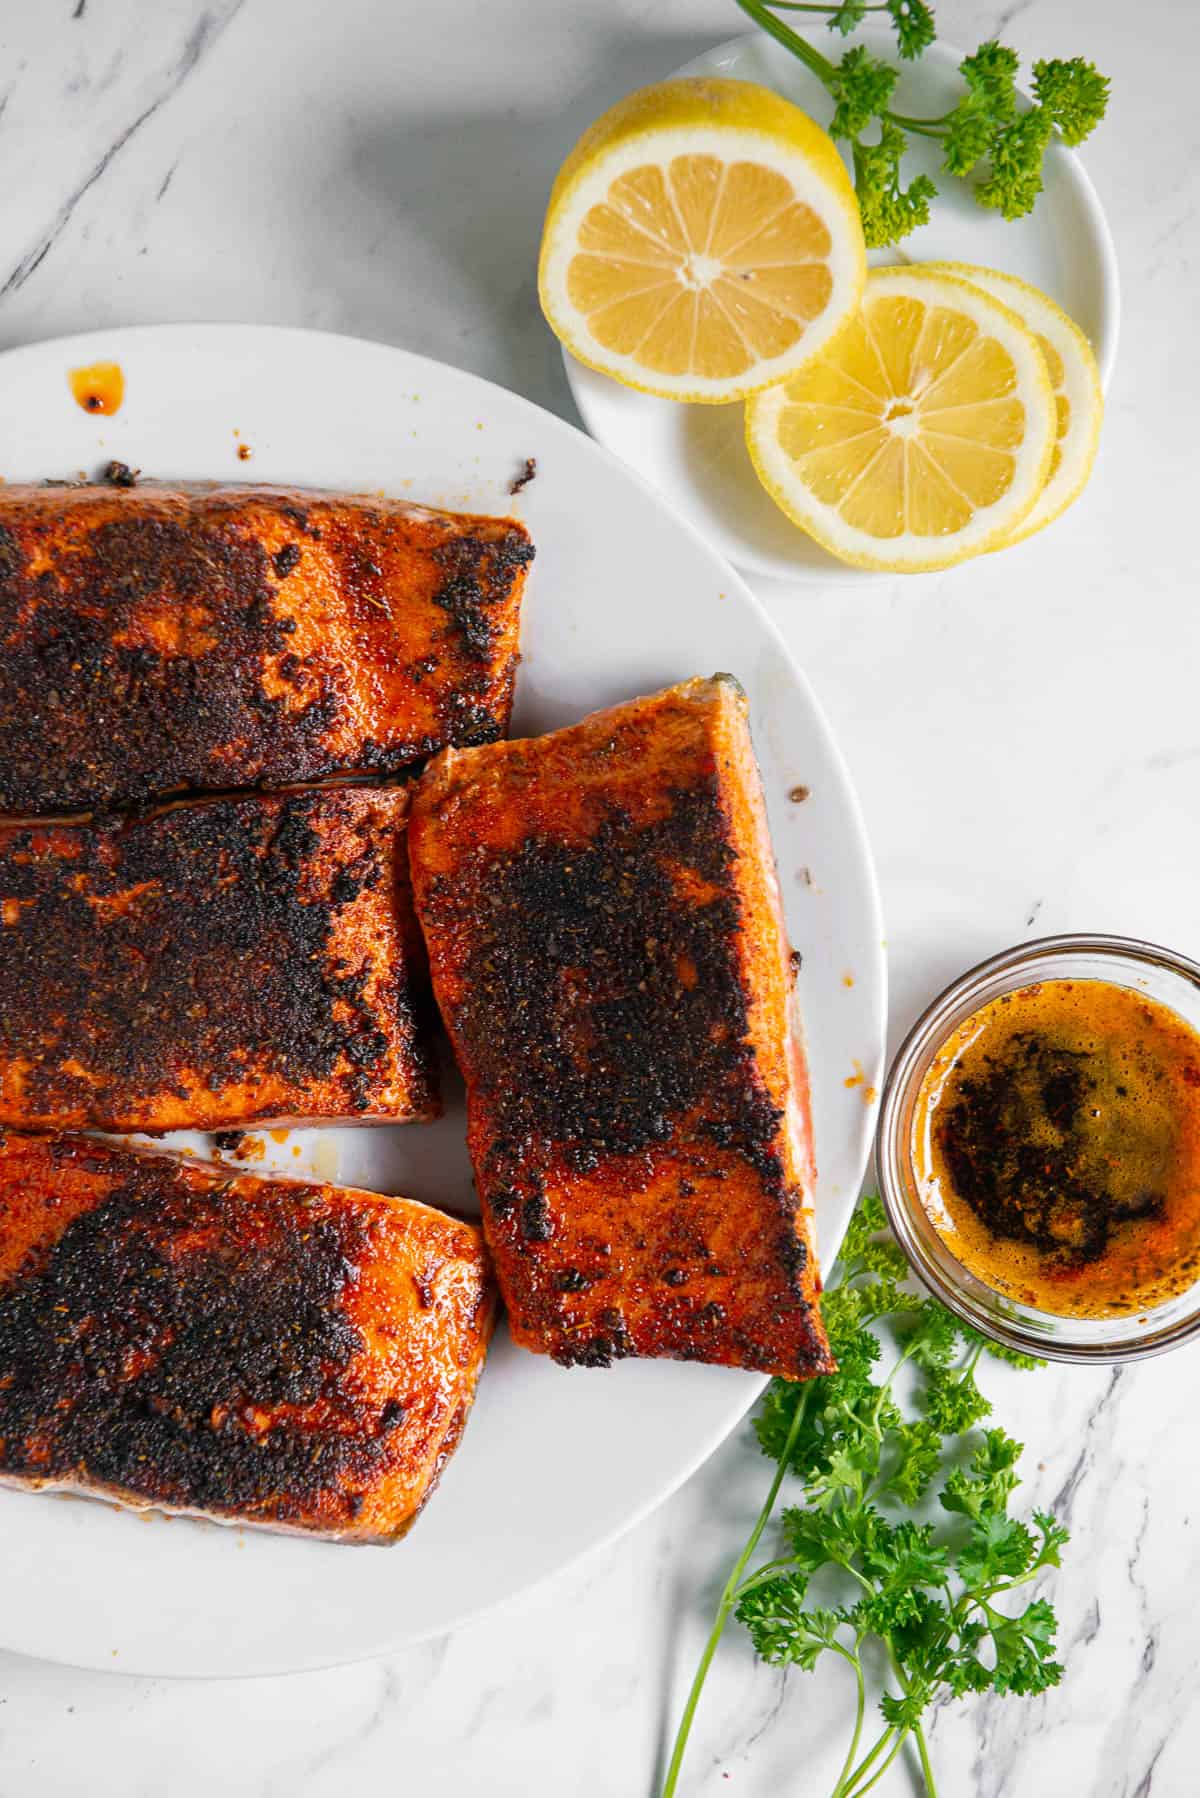 blackened salmon filets on plate with lemon and butter sauce.